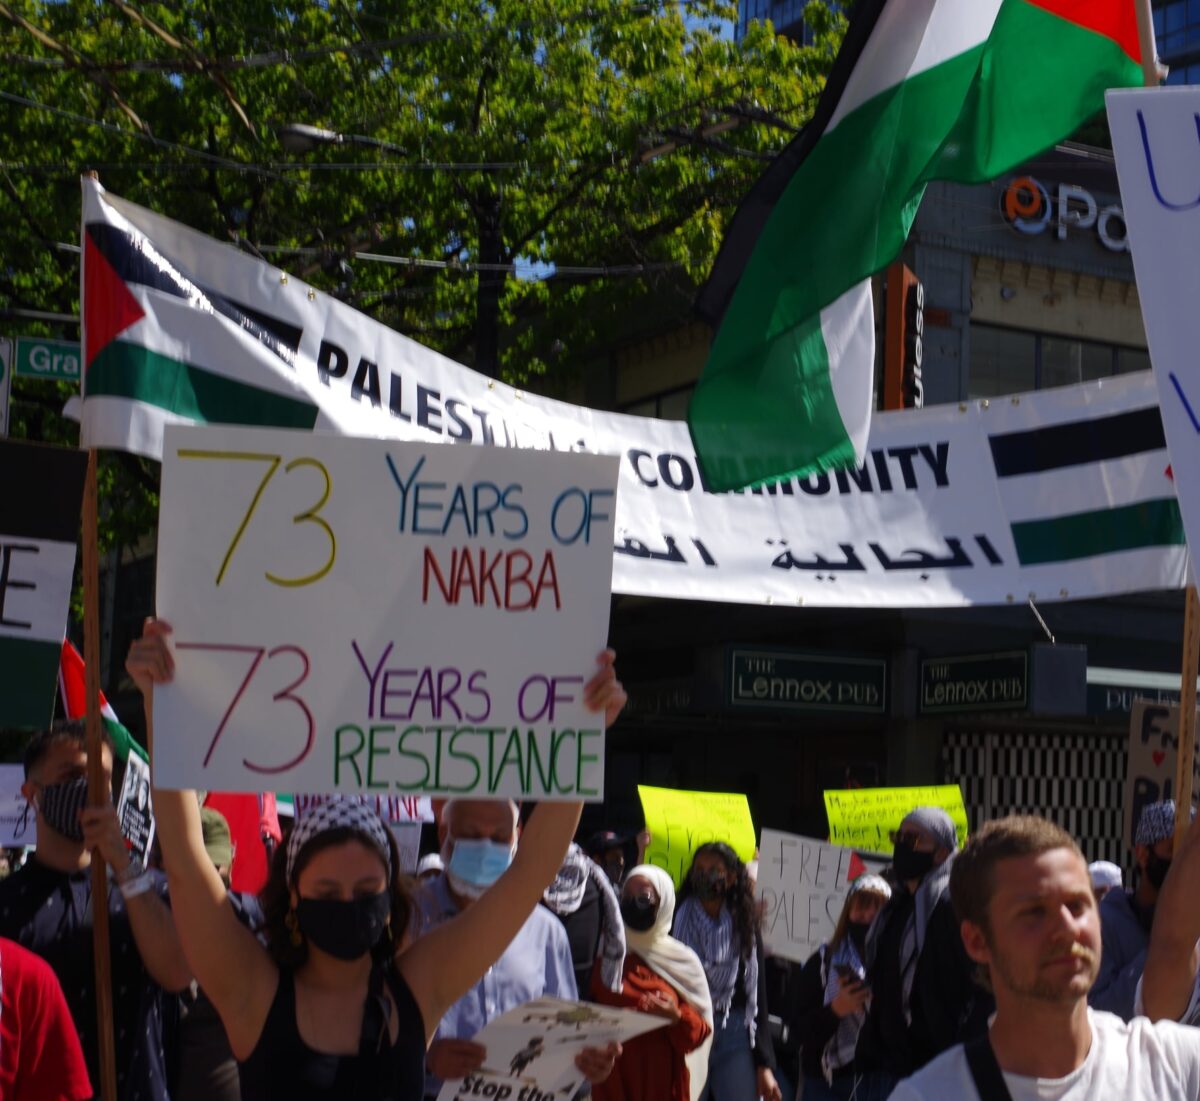 Vancouver comes out for Palestine in massive rally!